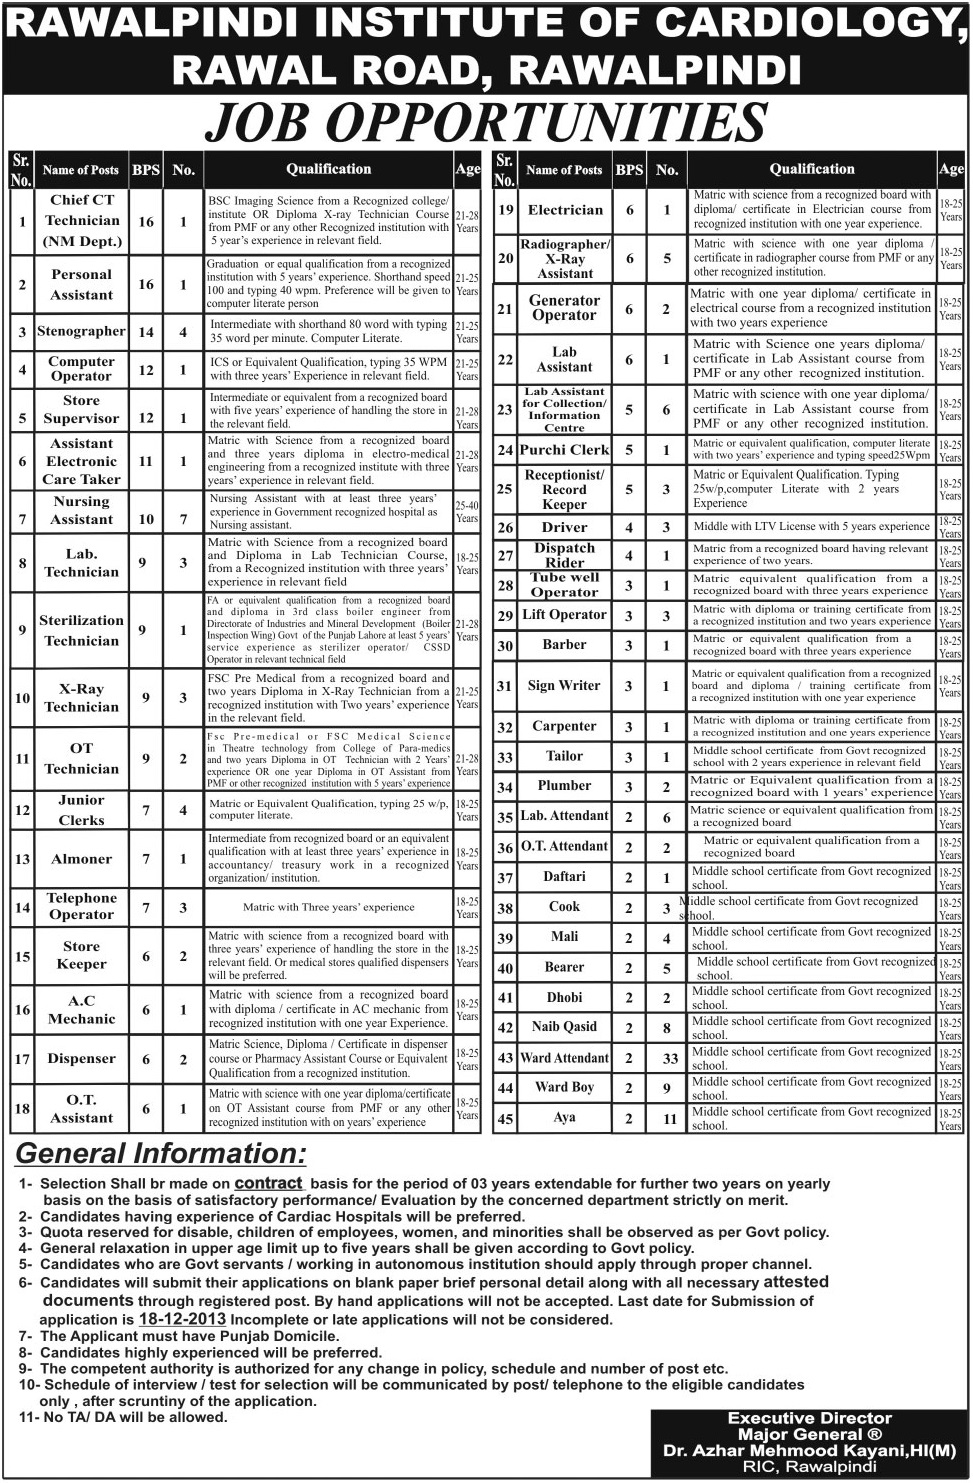 Chief CT Technician Jobs at Rawalpindi Institute of Cardiology